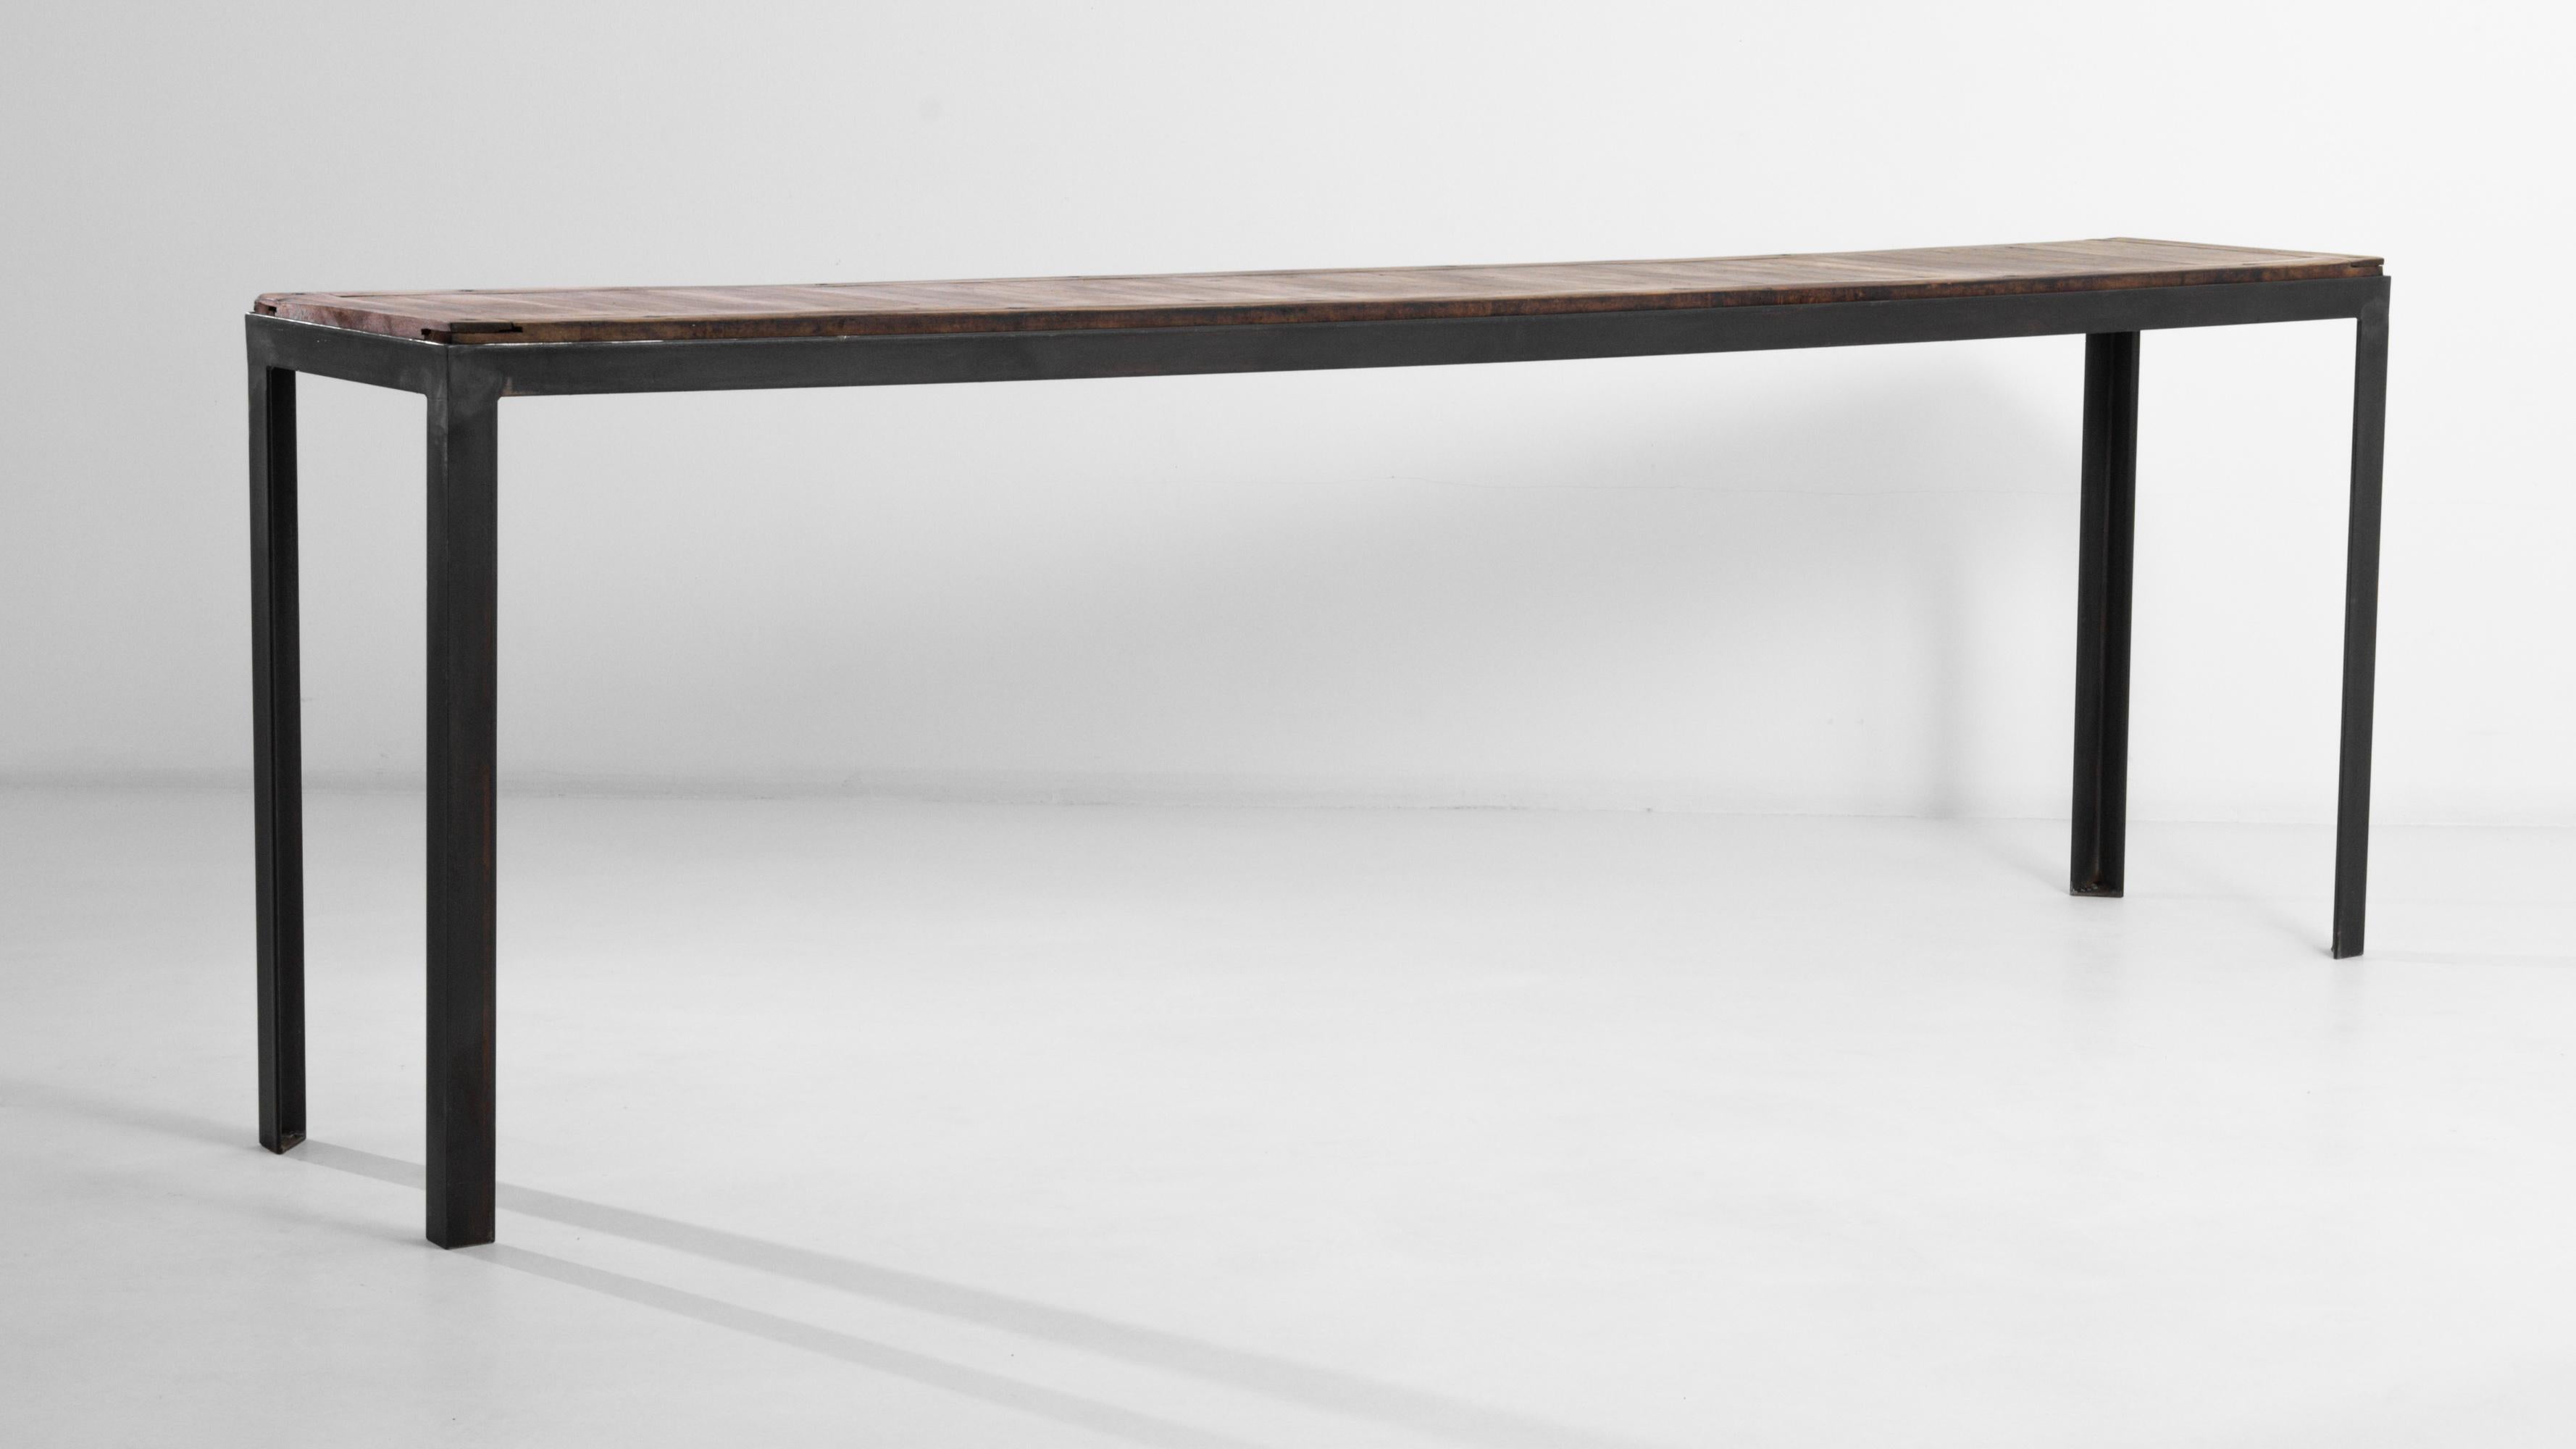 20th Century European Minimalist Table with Wooden Table Top 4